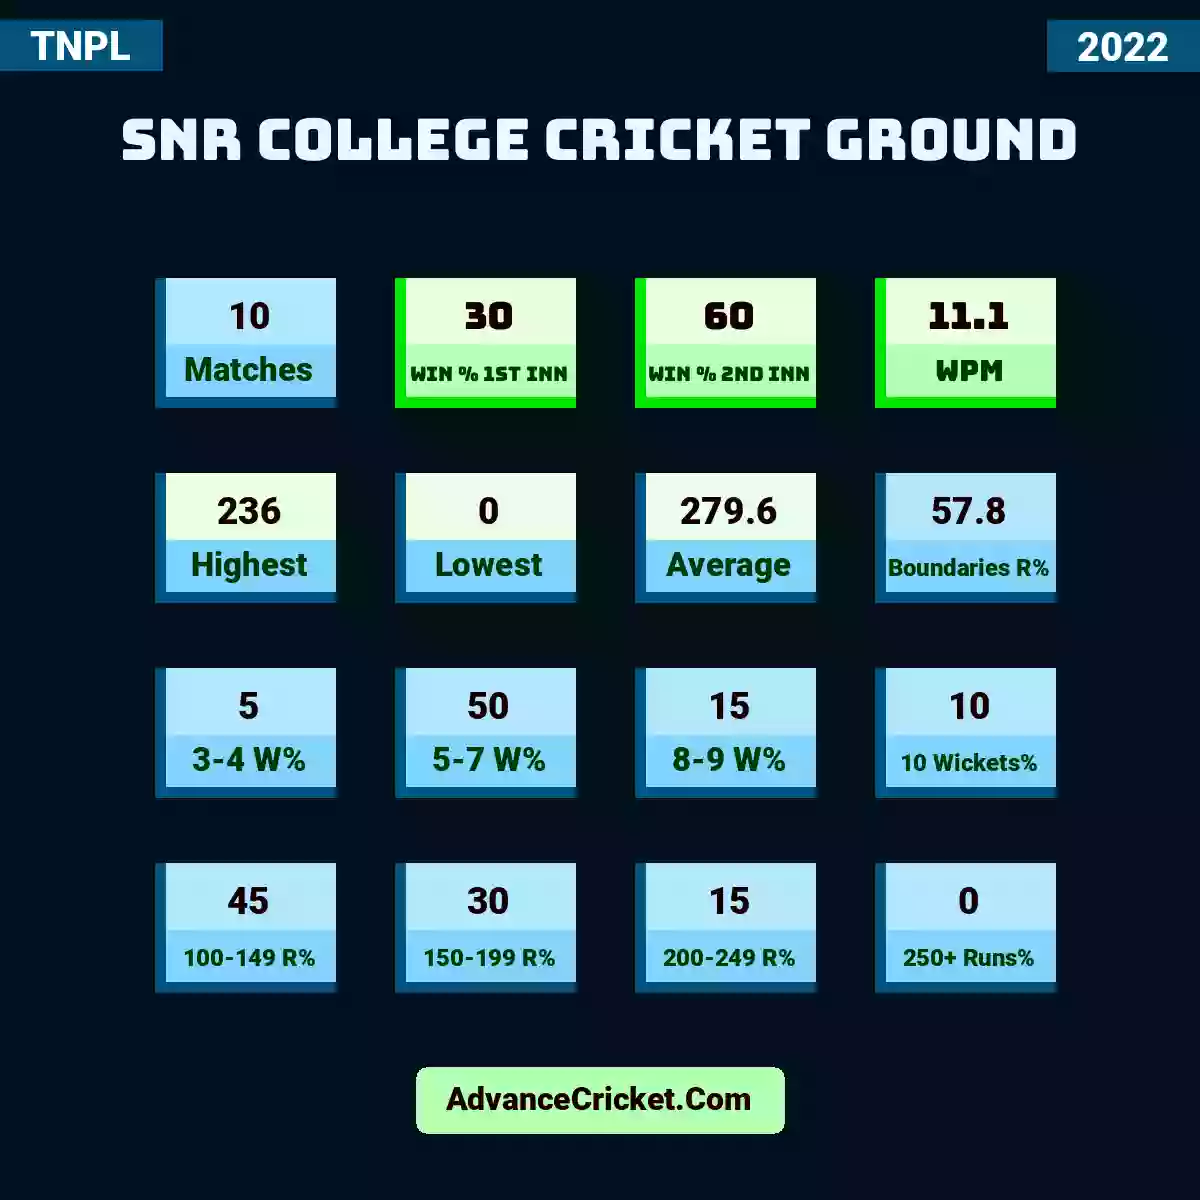 Image showing SNR College Cricket Ground with Matches: 10, Win % 1st Inn: 30, Win % 2nd Inn: 60, WPM: 11.1, Highest: 236, Lowest: 0, Average: 279.6, Boundaries R%: 57.8, 3-4 W%: 5, 5-7 W%: 50, 8-9 W%: 15, 10 Wickets%: 10, 100-149 R%: 45, 150-199 R%: 30, 200-249 R%: 15, 250+ Runs%: 0.